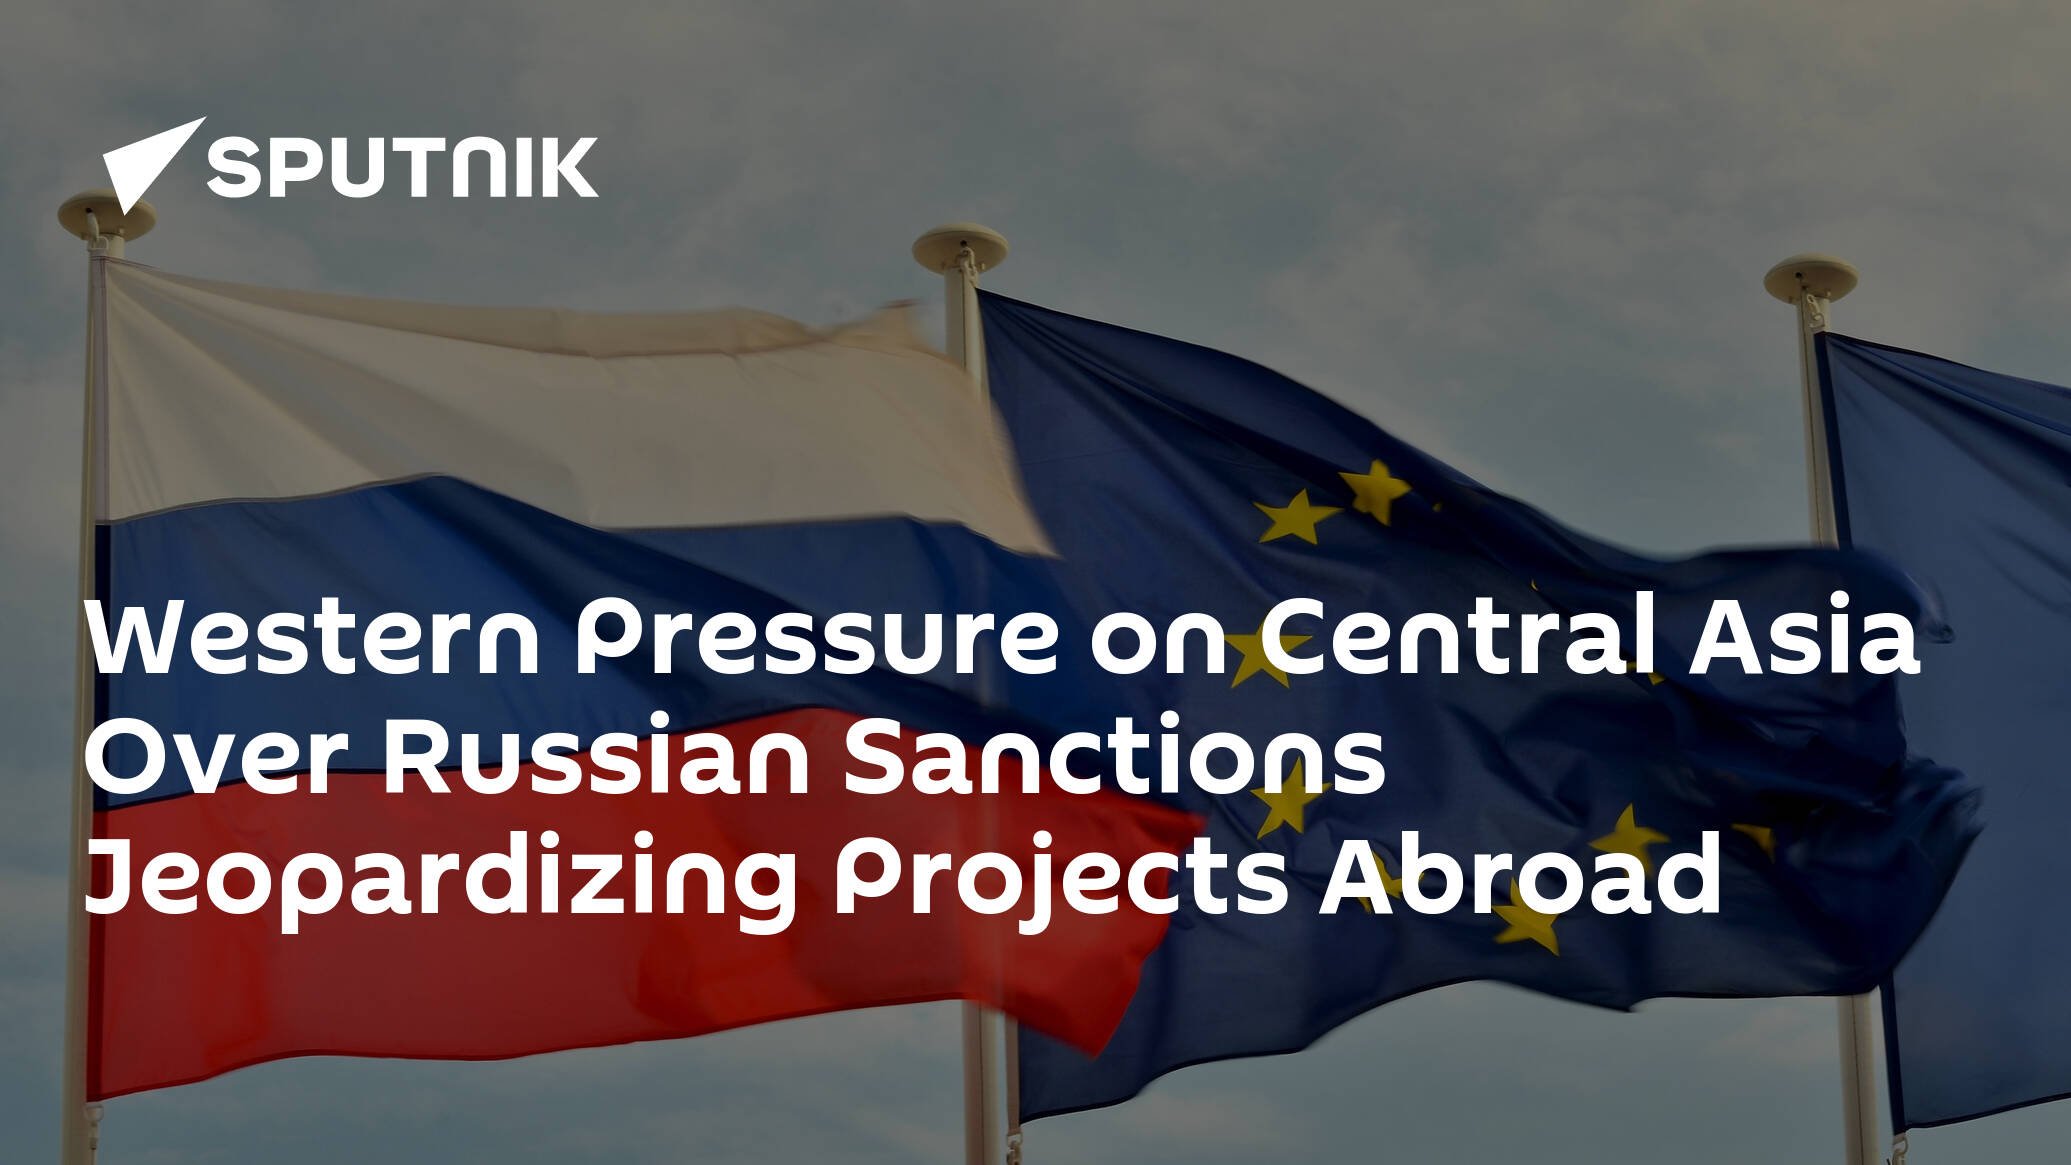 Western Pressure on Central Asia Over Russian Sanctions Jeopardizing Projects Abroad